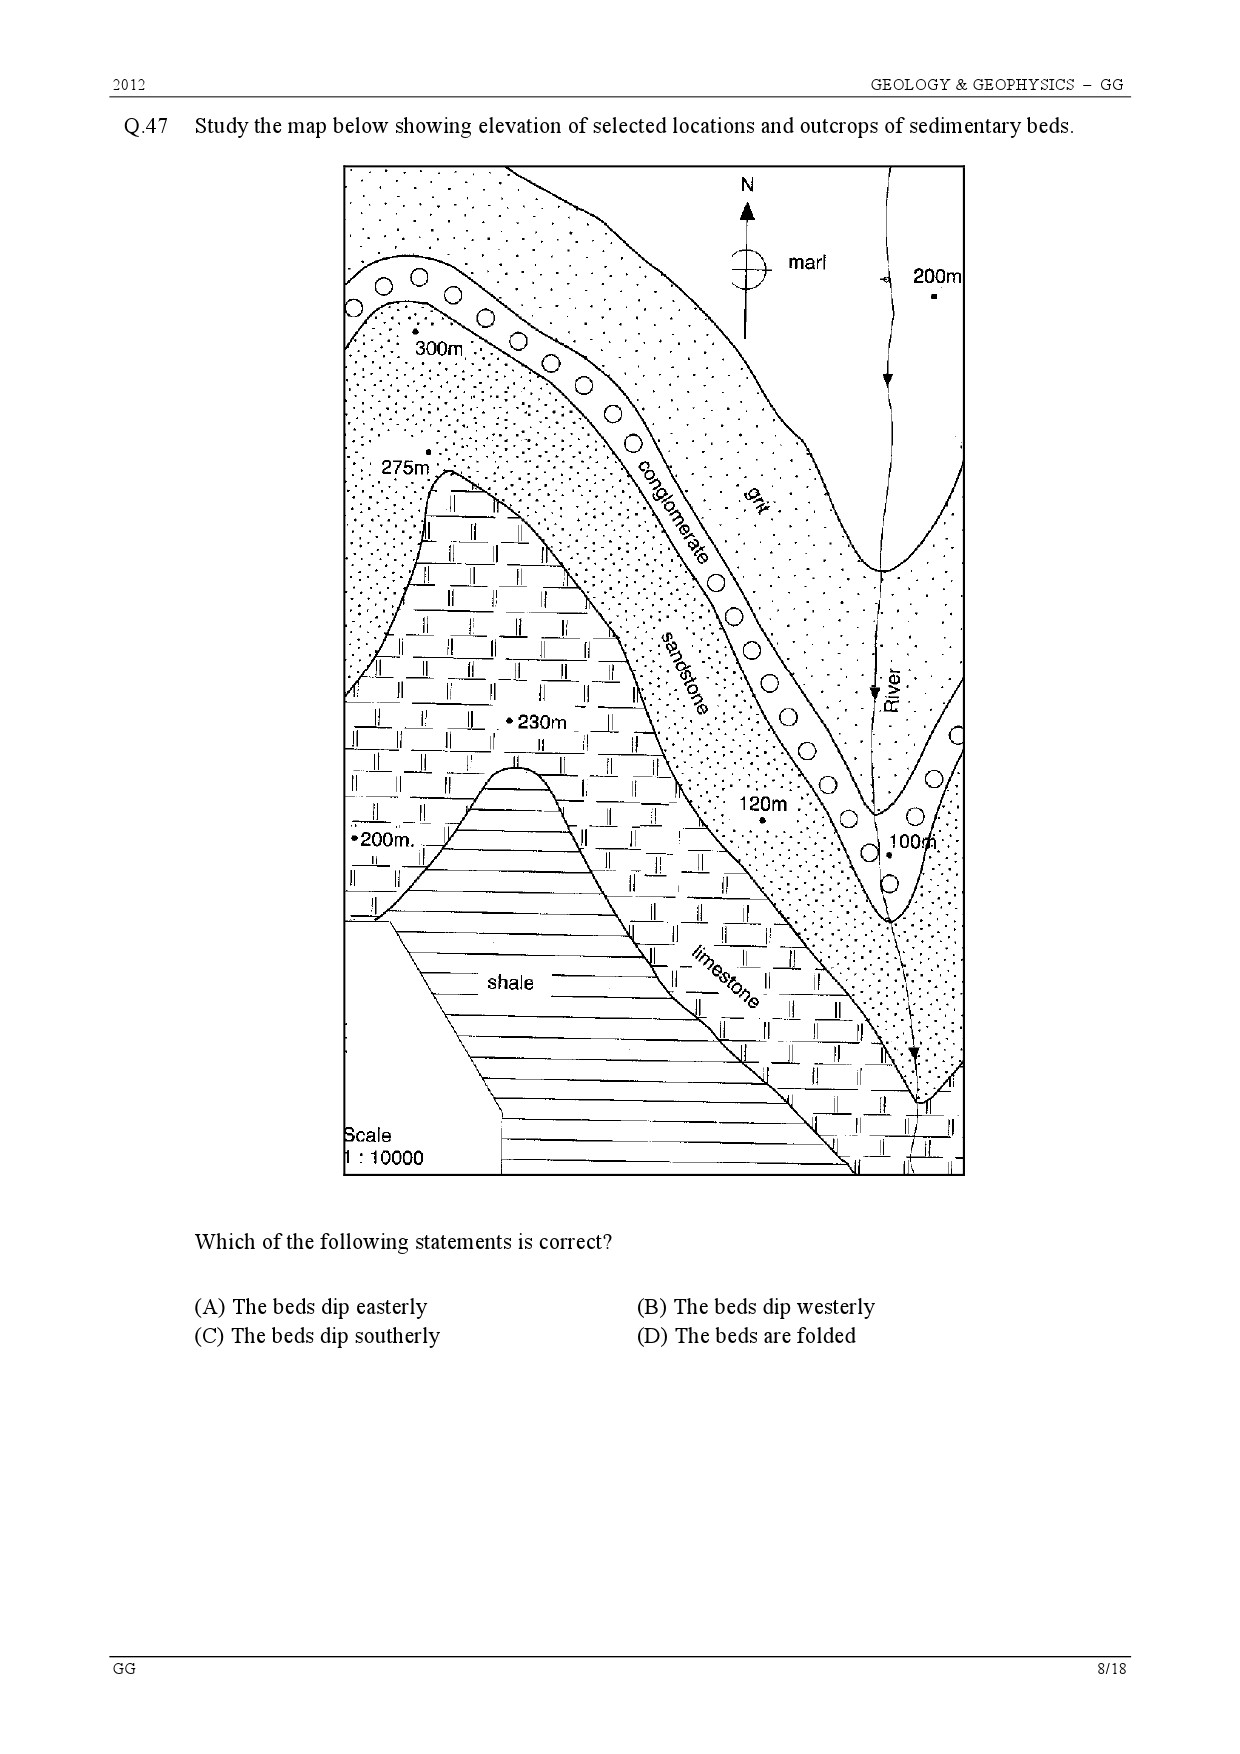 GATE Exam Question Paper 2012 Geology and Geophysics 8